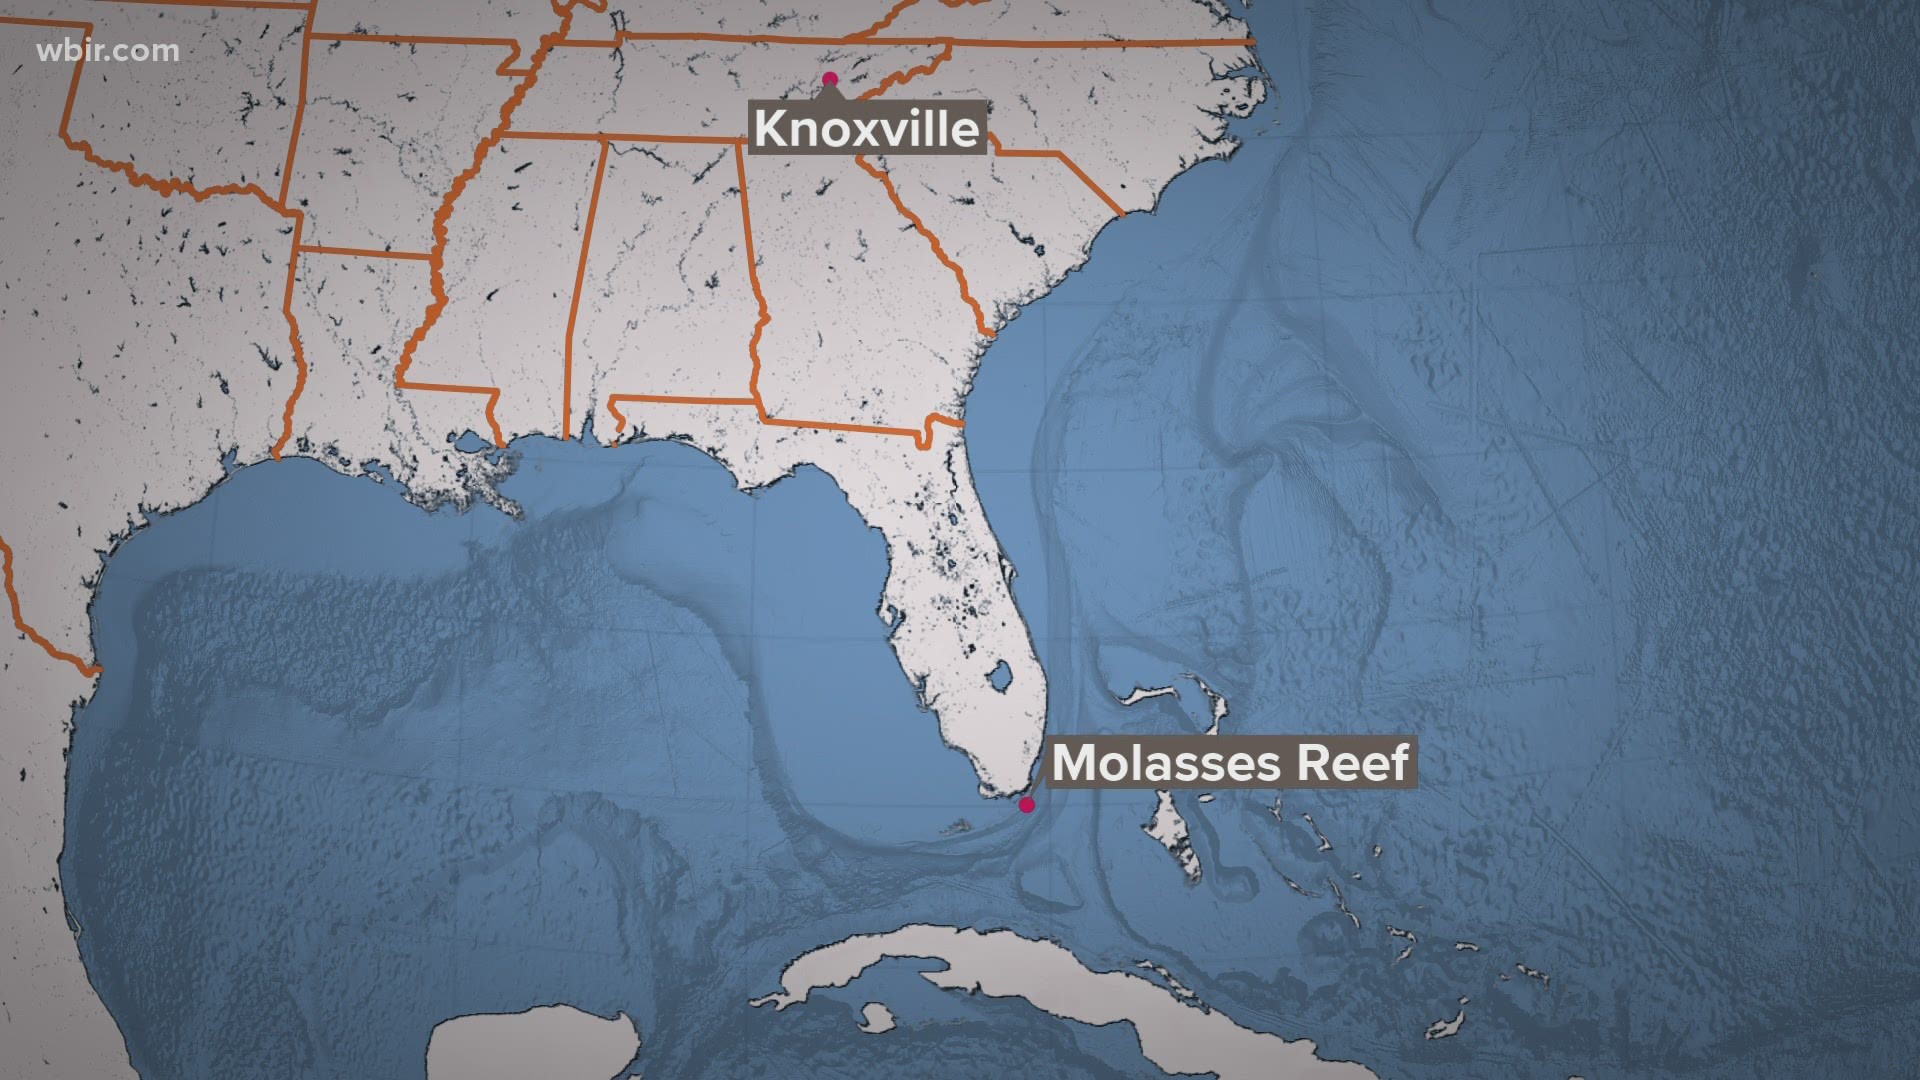 A Dandridge man is dead after a snorkeling accident in the Florida Keys.